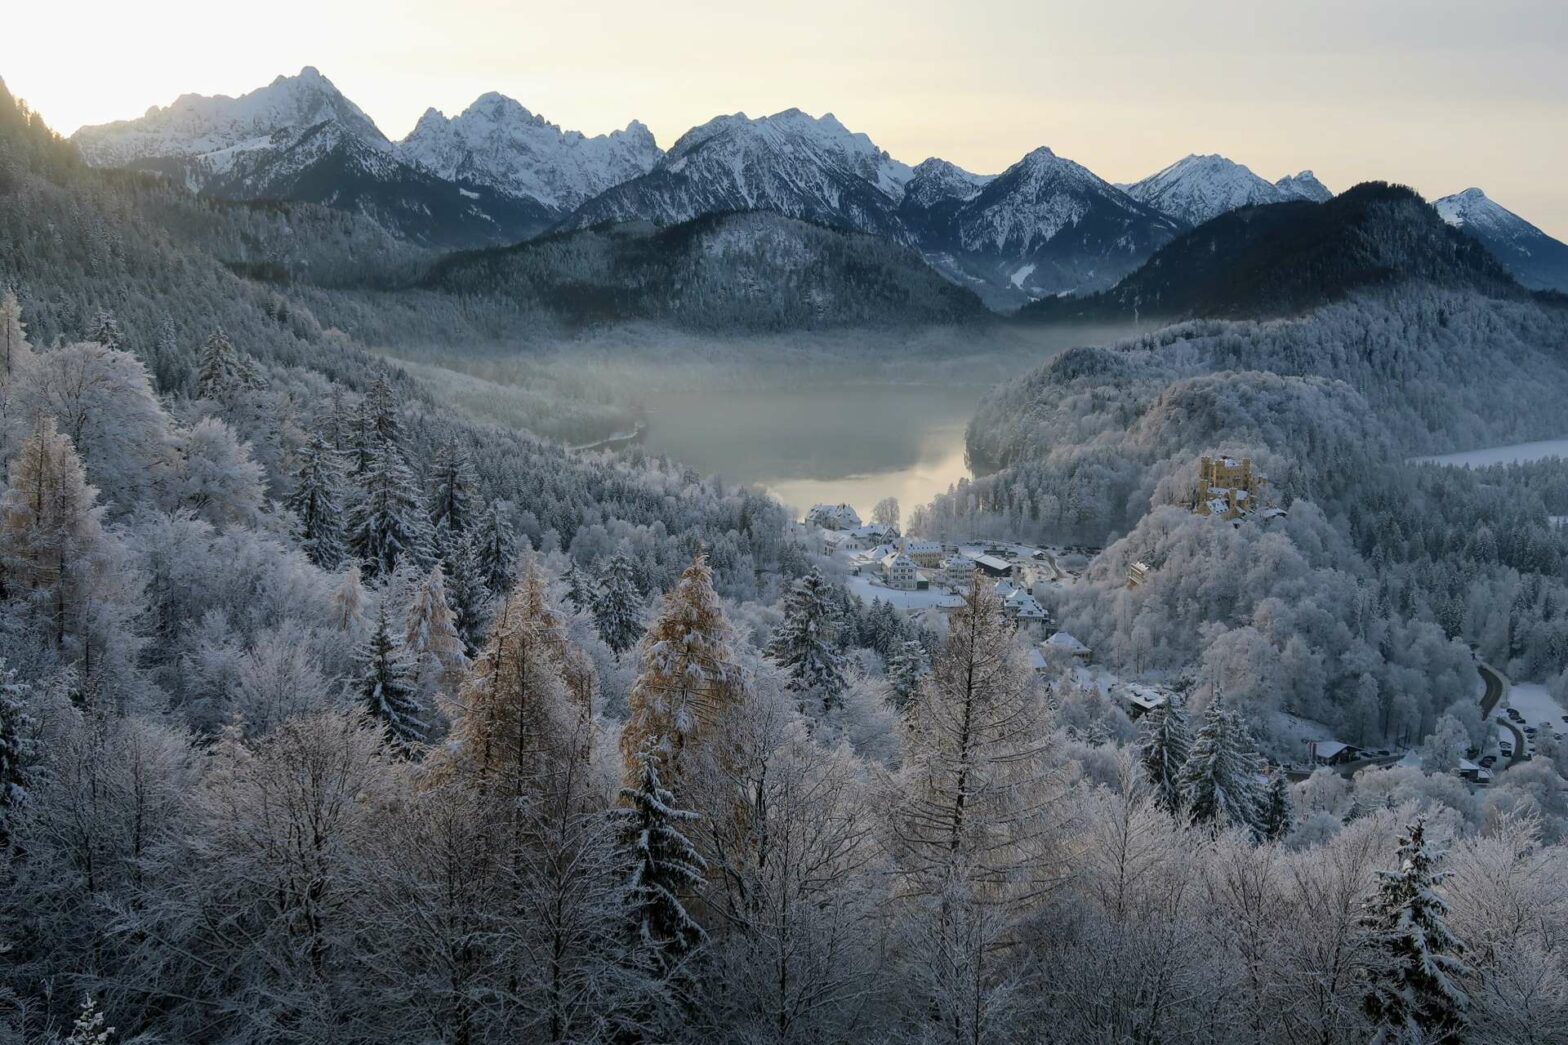 View from Neuschwanstein Castle of lake and mountains in the snow